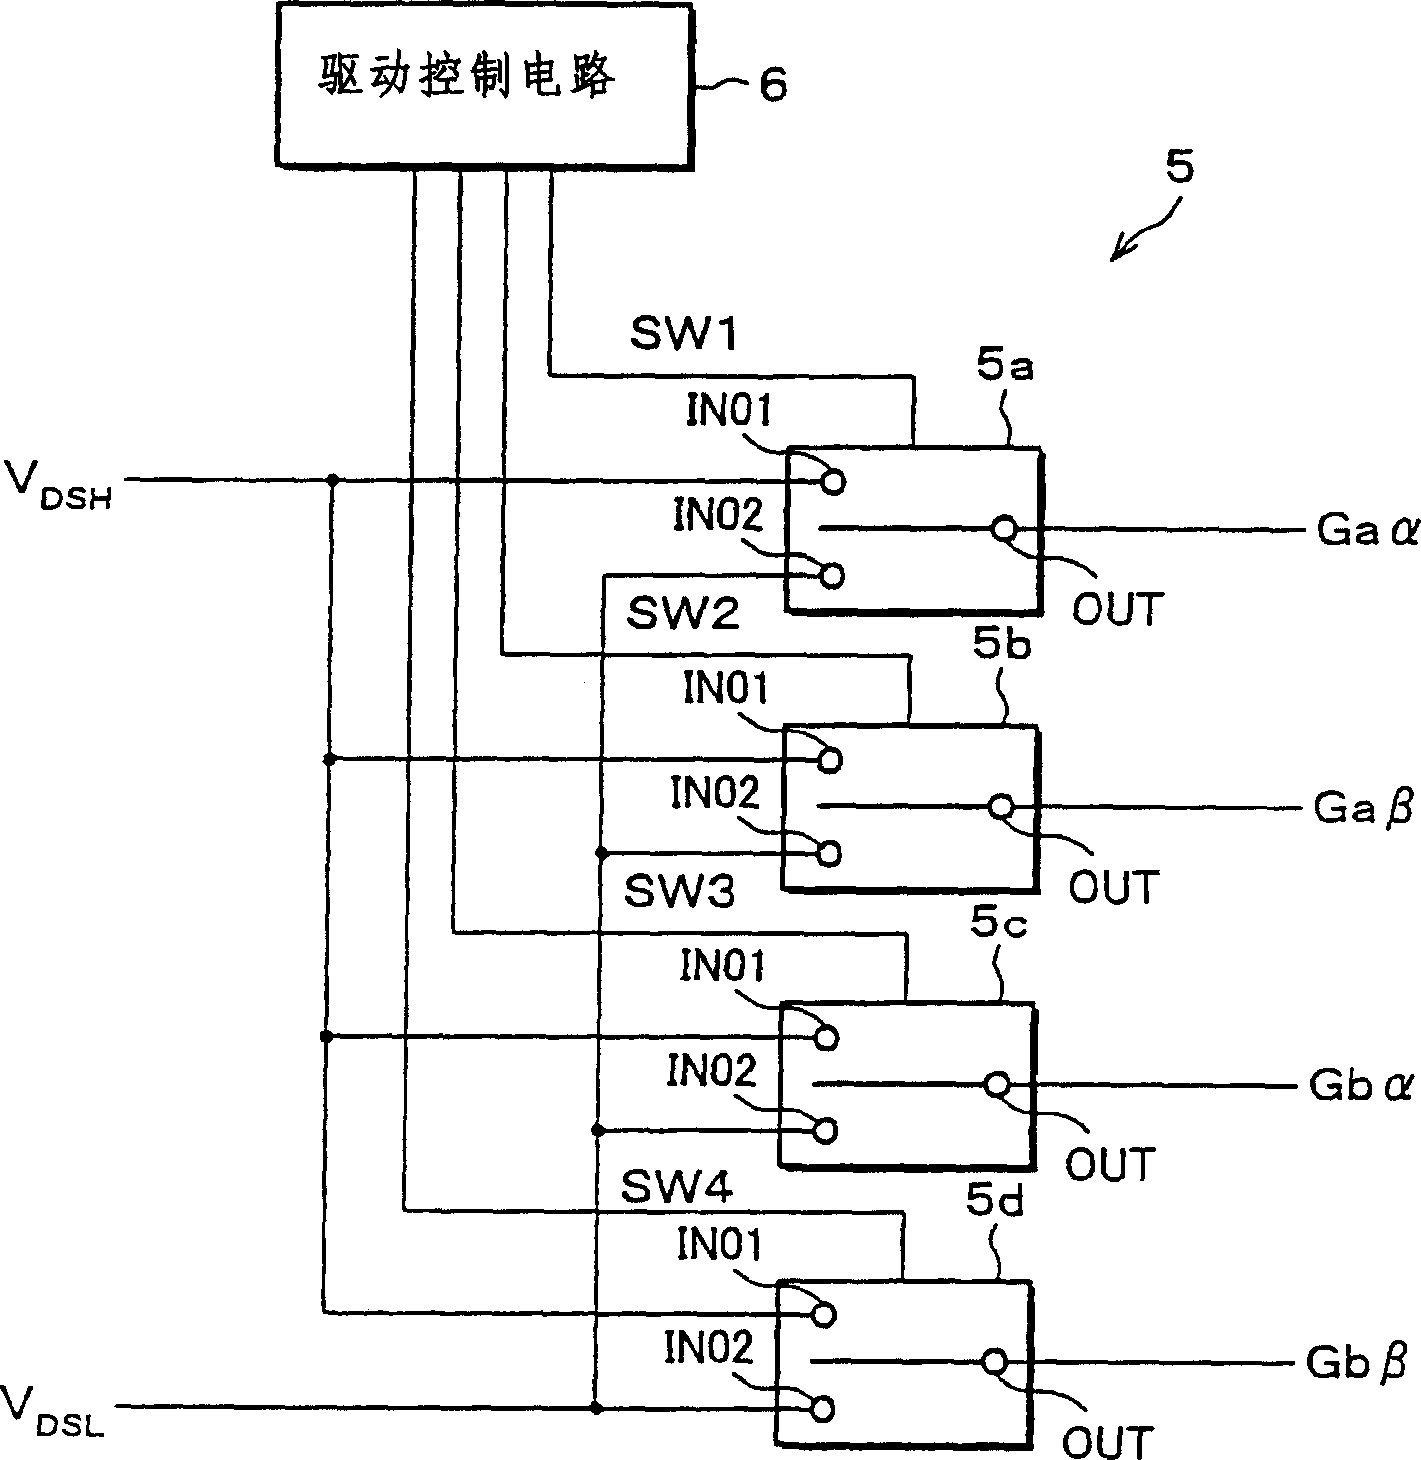 Active matrix display device and data line switching circuit, switching section drive circuit, and scanning line drive circuit thereof